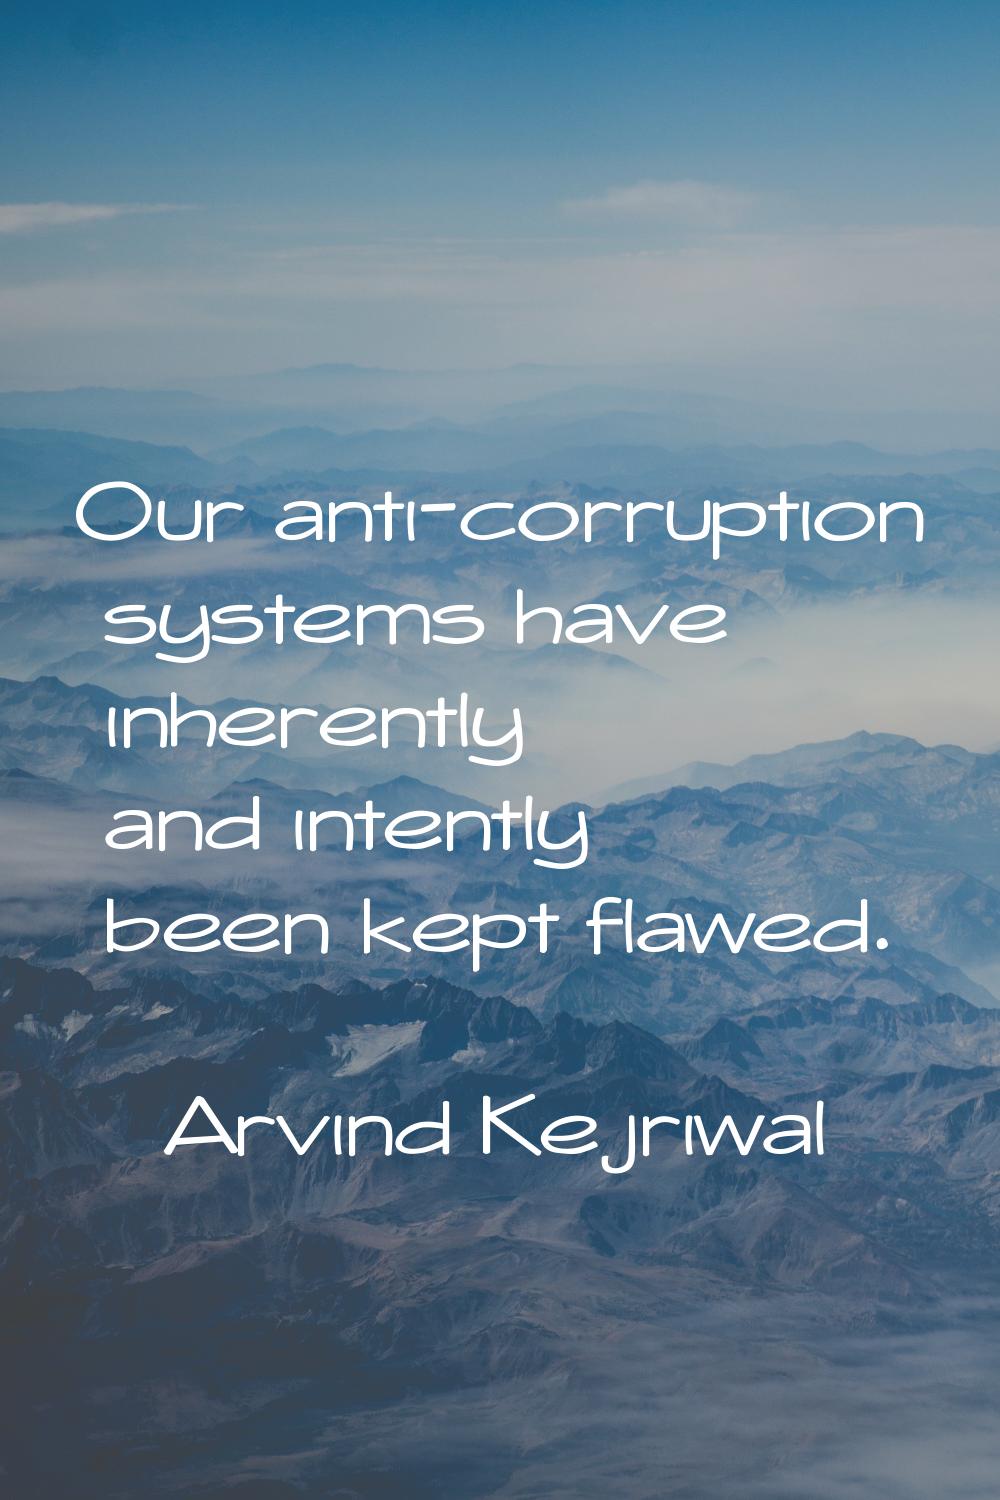 Our anti-corruption systems have inherently and intently been kept flawed.